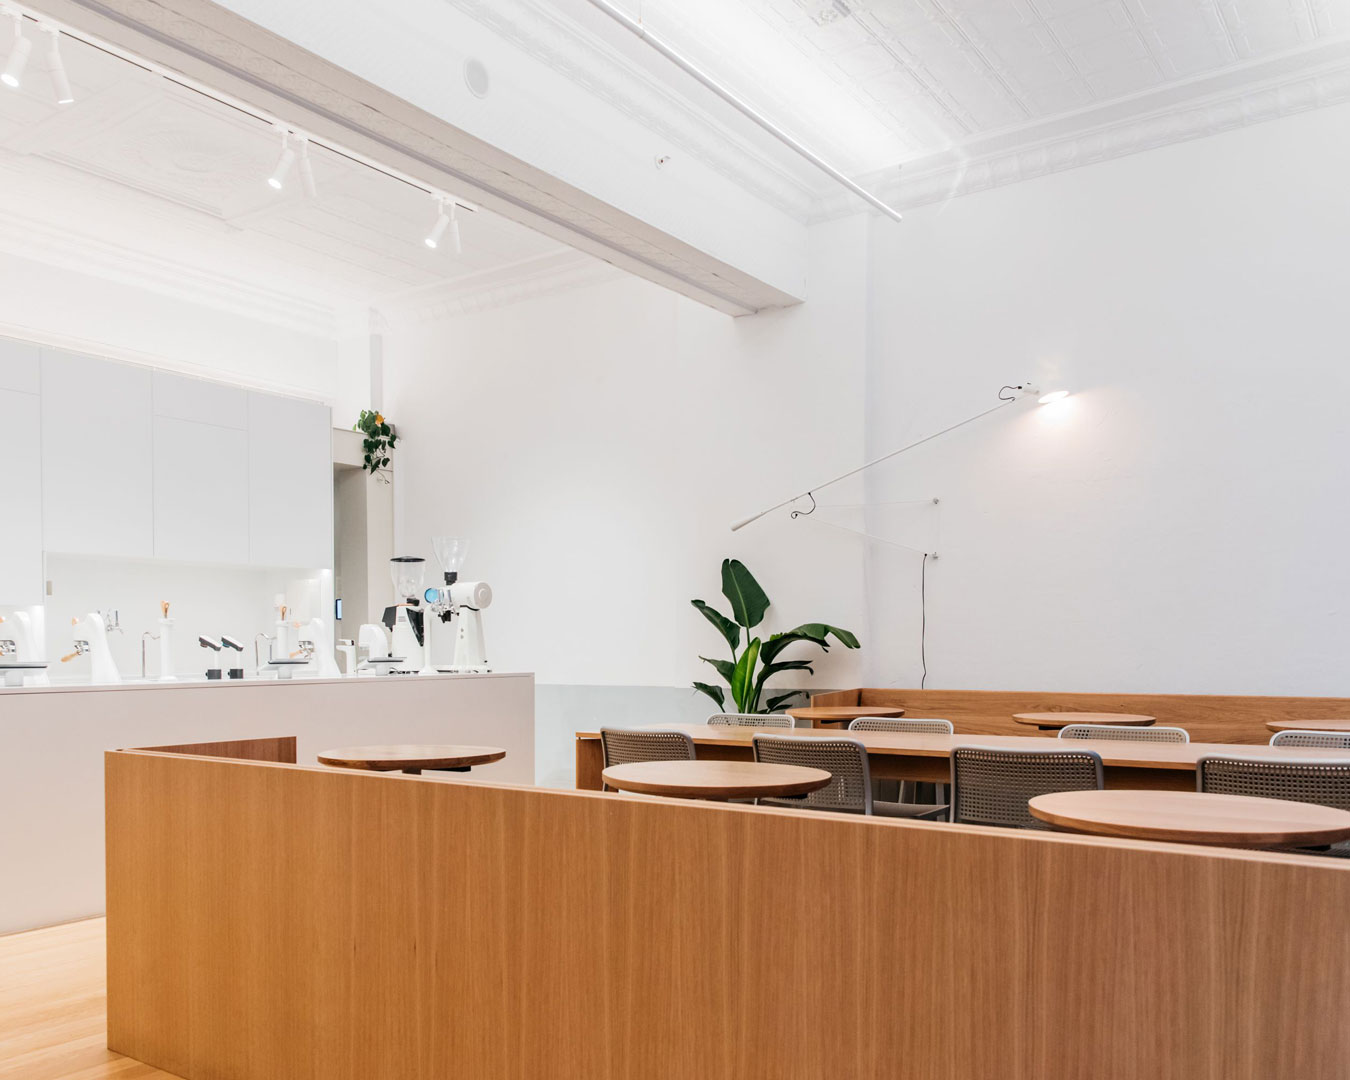 The clean, minimalist dining room at Industry Beans, one of the best cafes in Sydney